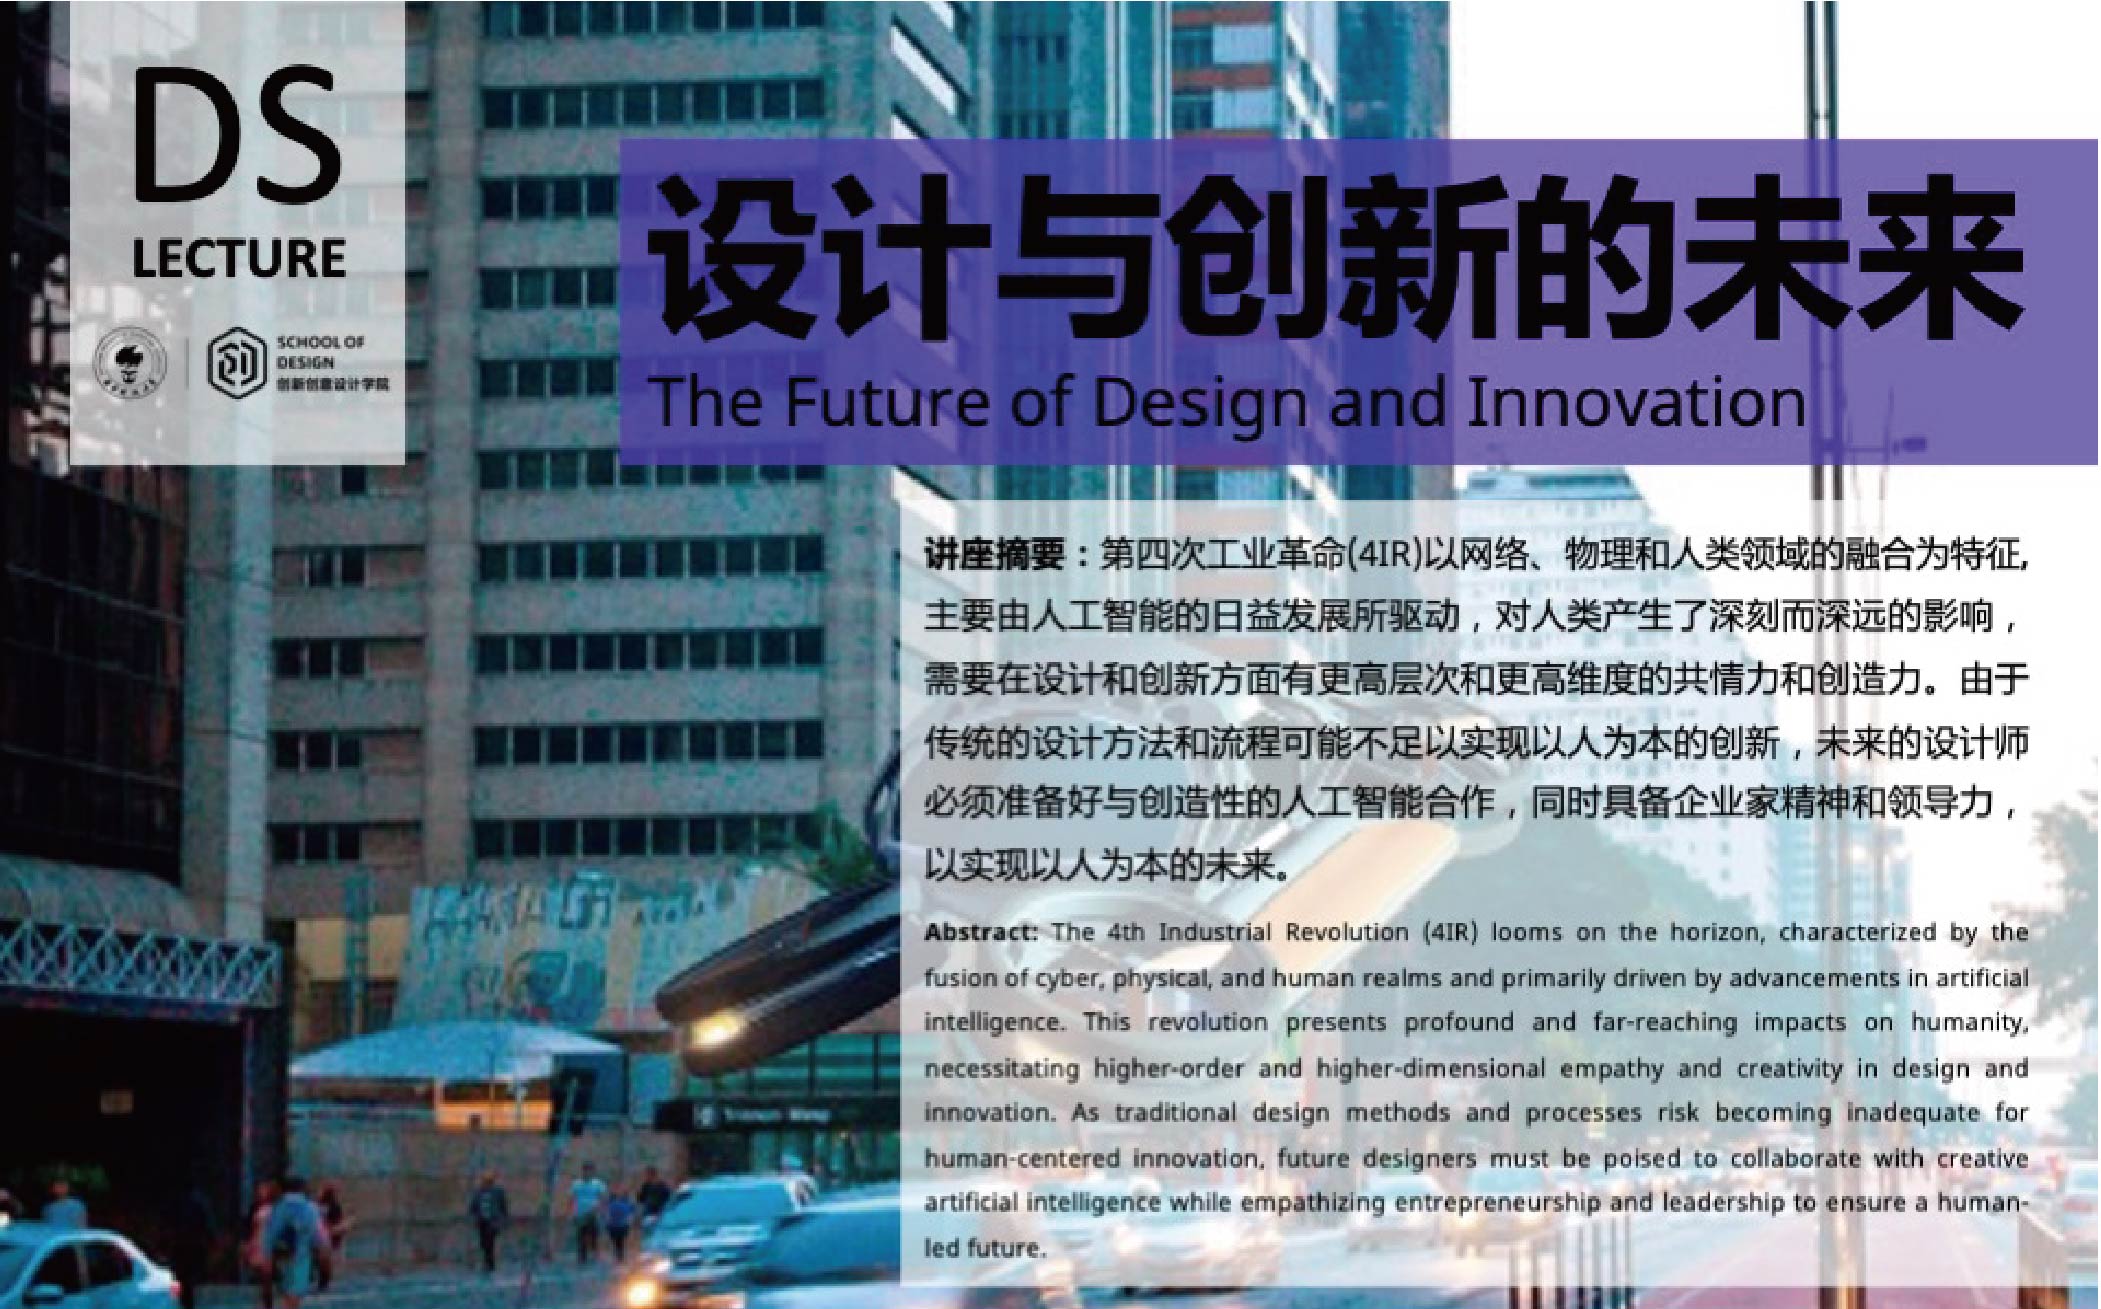 DS Lecture: The Future of Design and Innovation